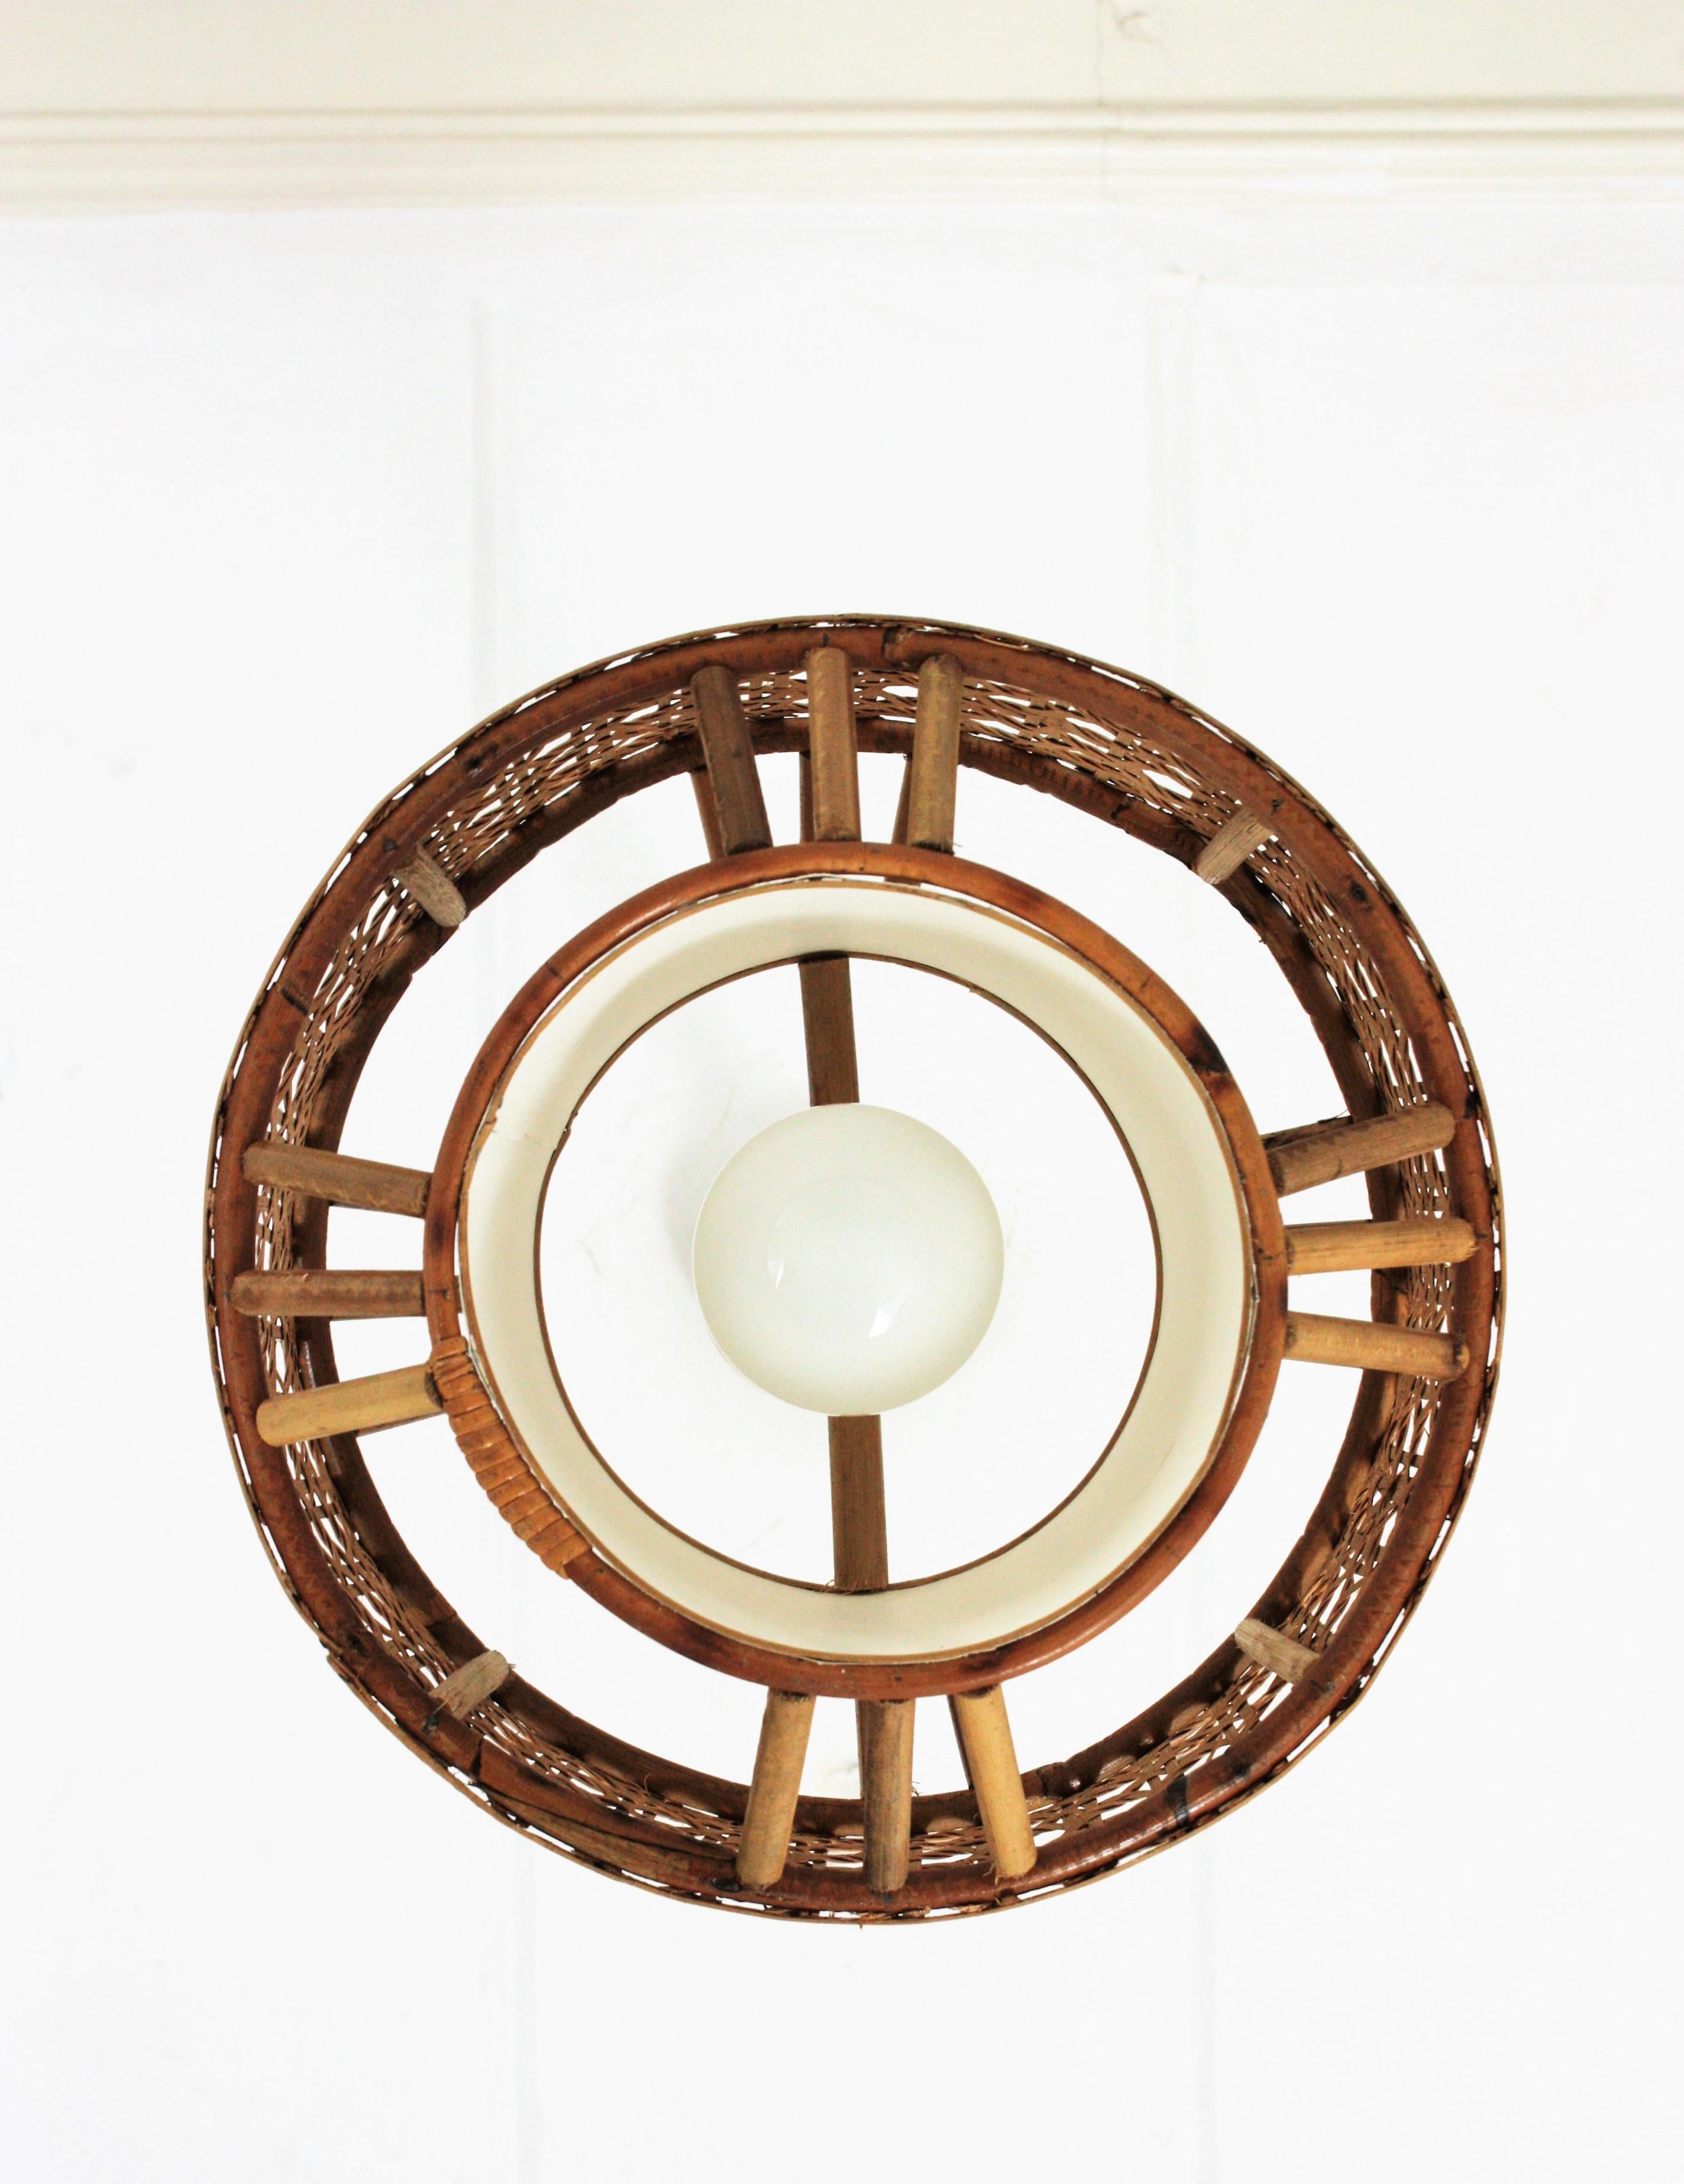 Bamboo Rattan and Wicker Weave Drum Pendant Light or Lantern  For Sale 2